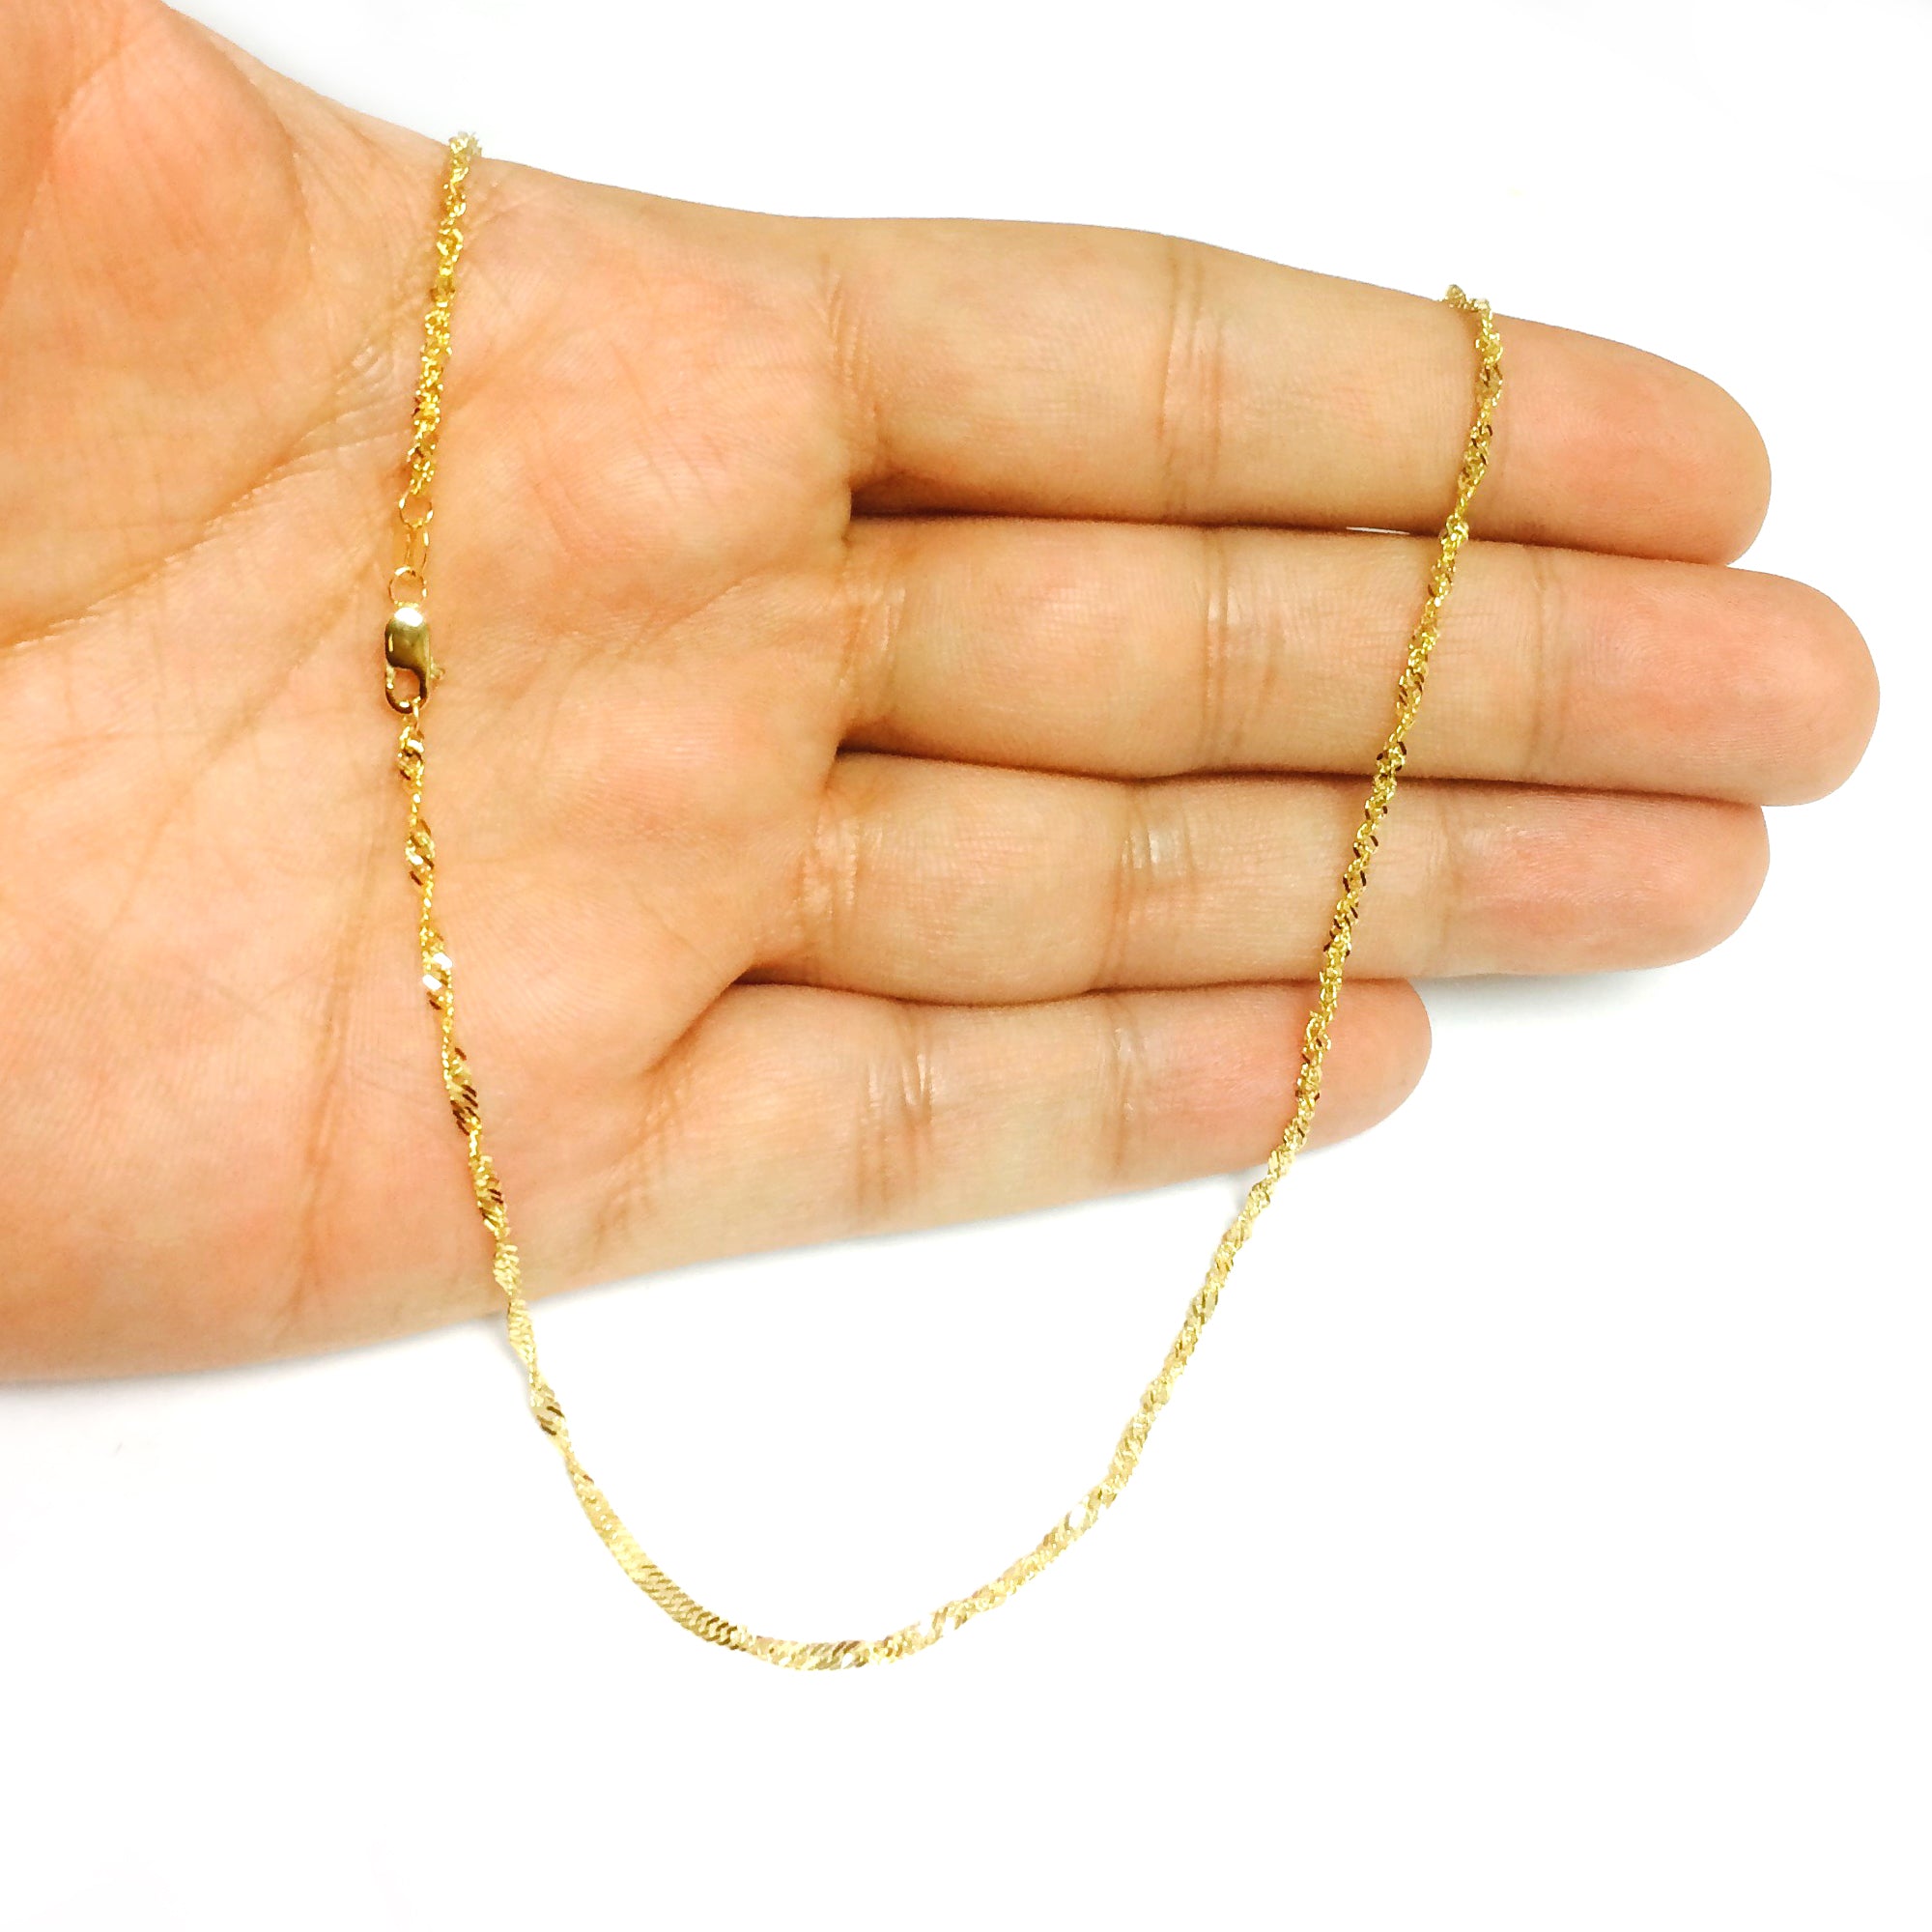 10k Yellow Gold Singapore Chain Necklace, 1.7mm fine designer jewelry for men and women